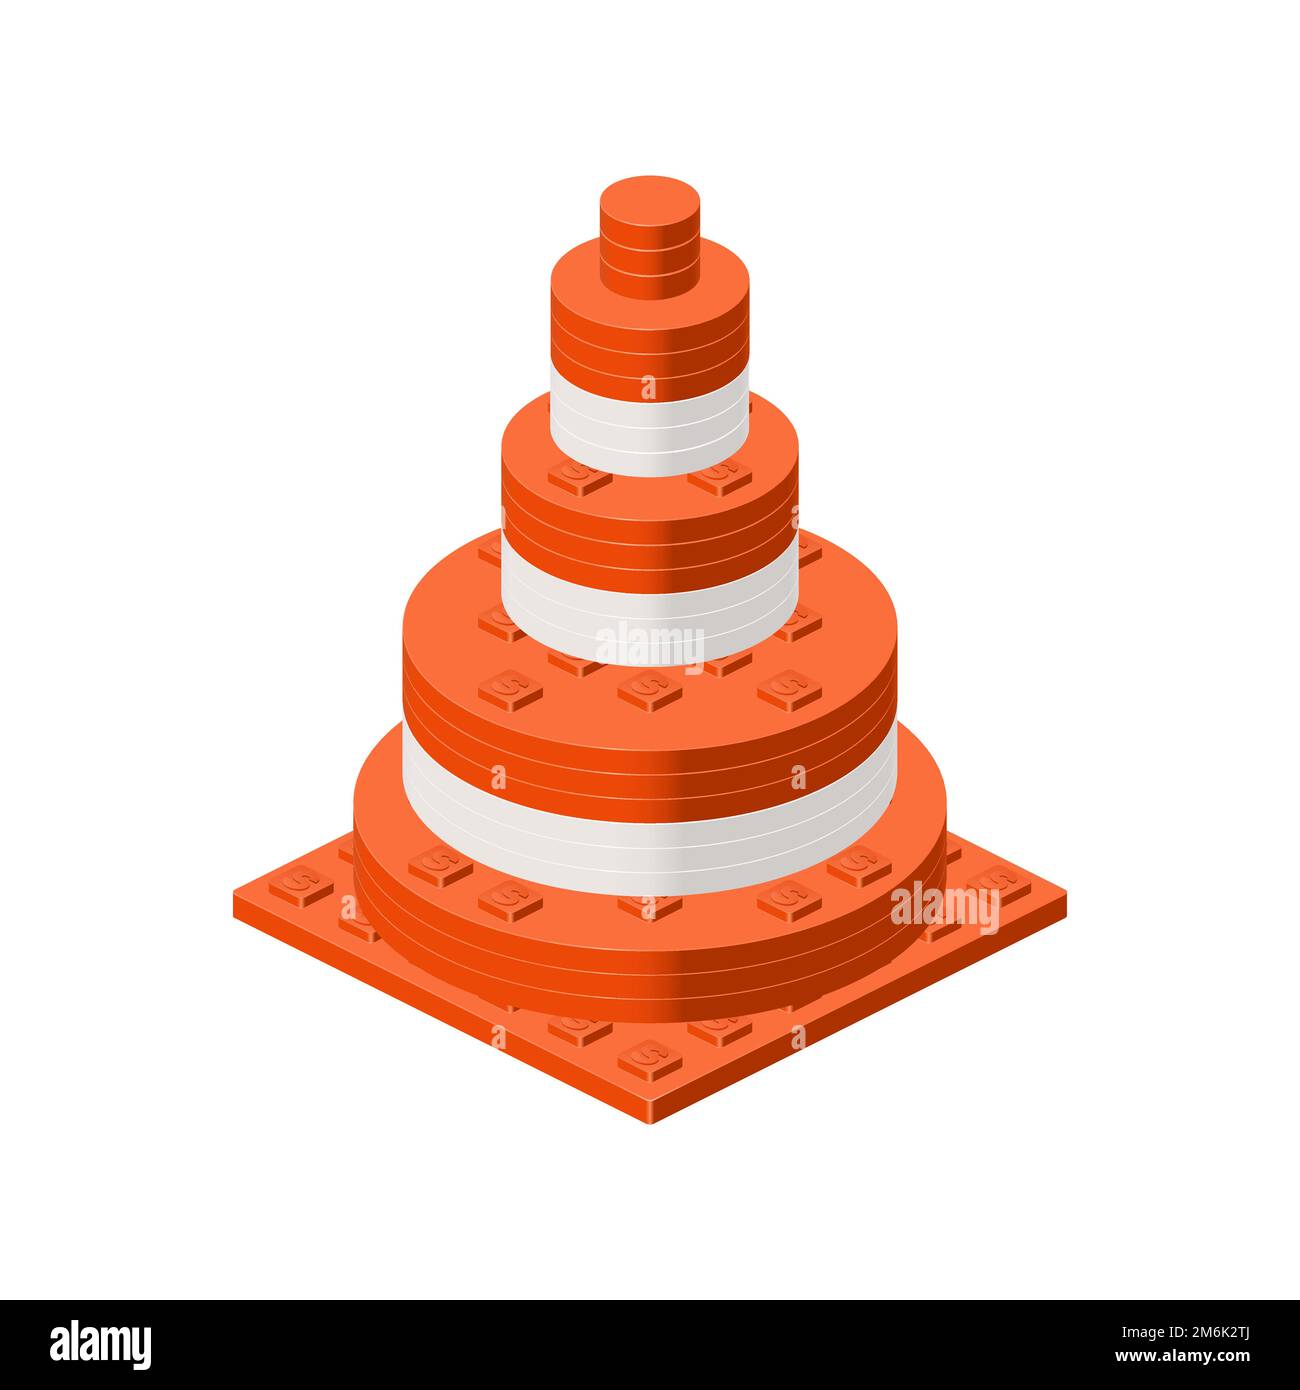 Bright Traffic Cone Made Up Of Plastic Blocks On A White Background In Isometric Style For Print